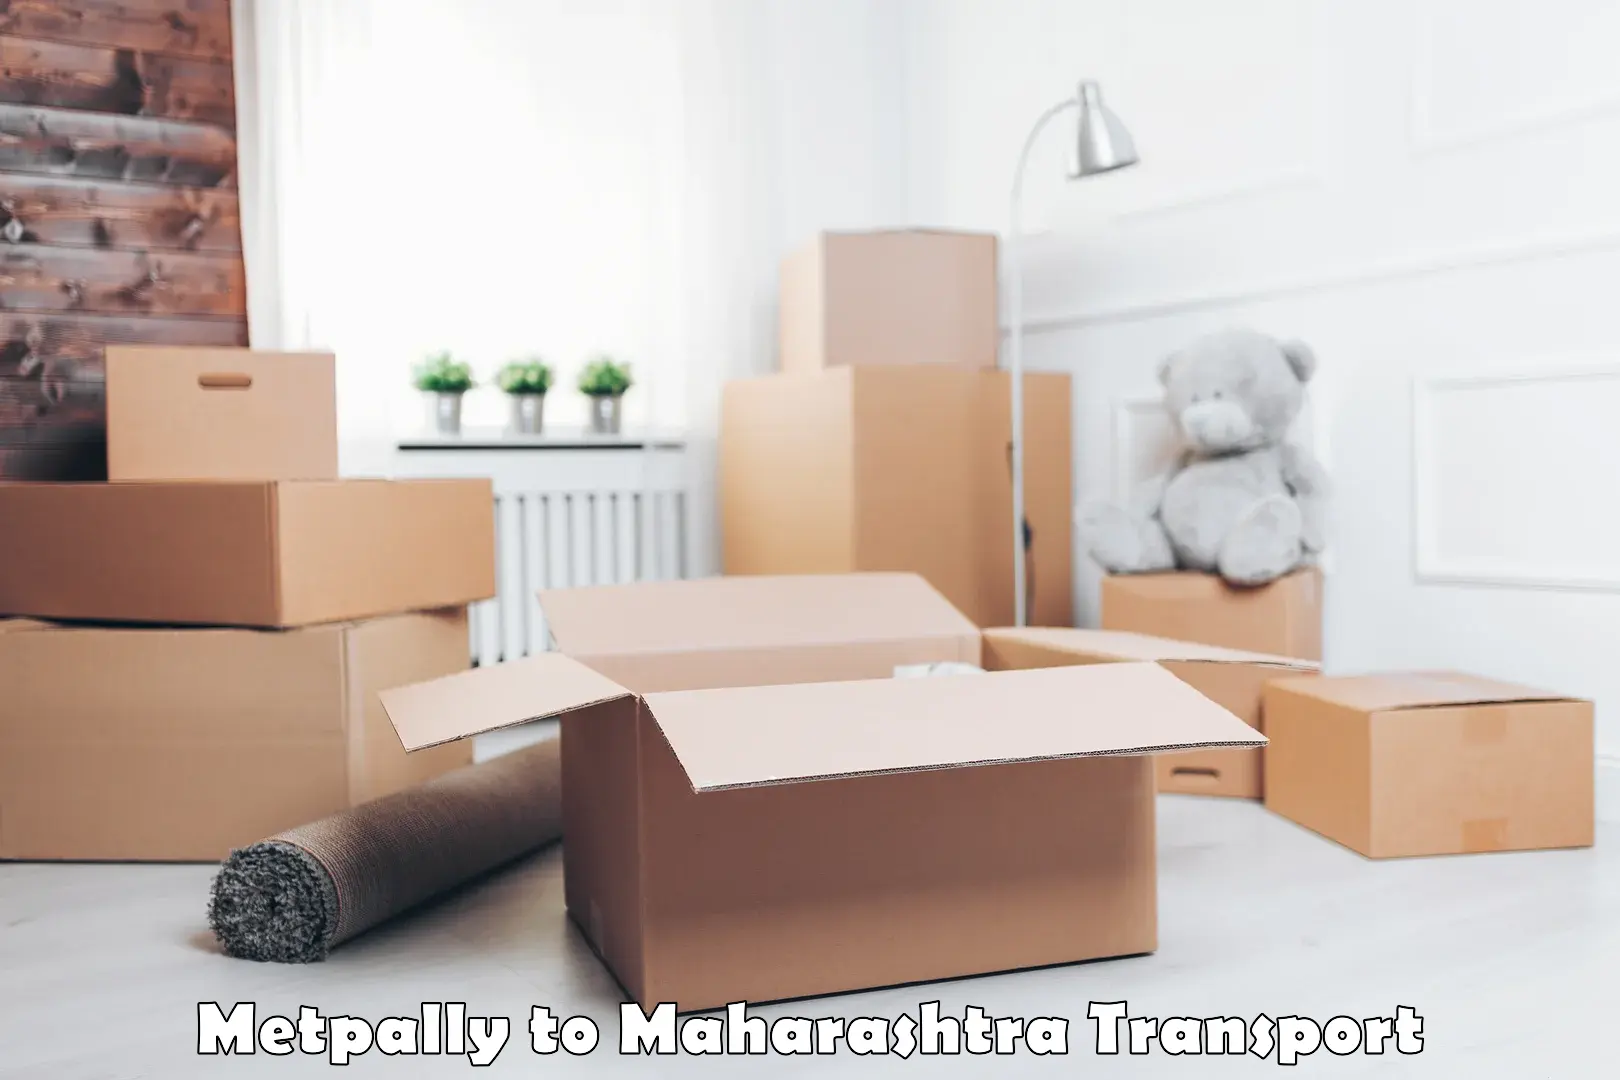 Part load transport service in India in Metpally to Koregaon